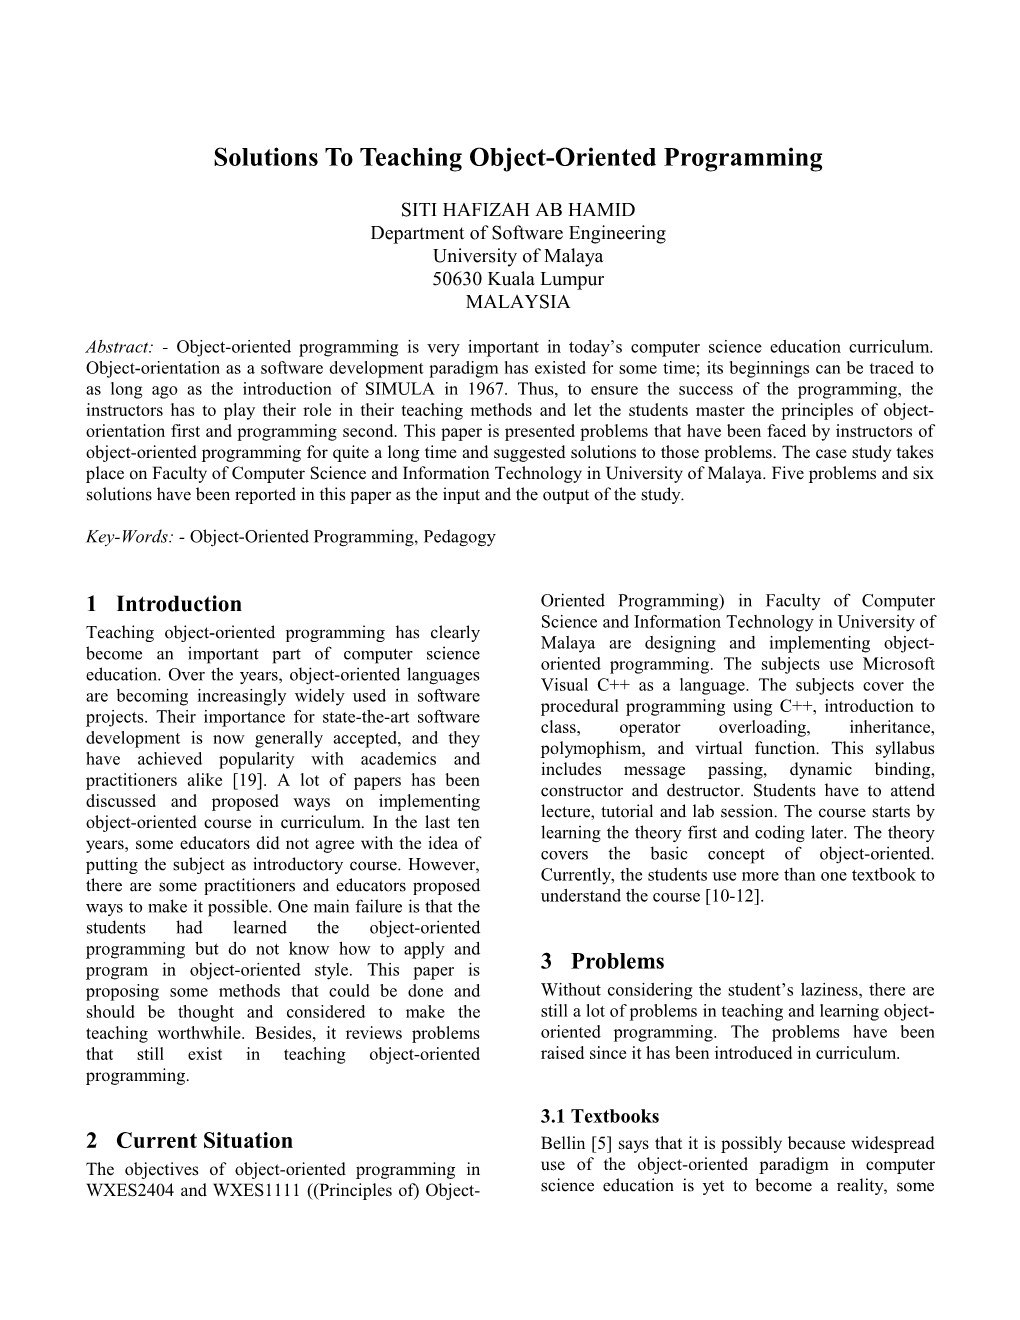 Solutions to Teaching Object-Oriented Programming